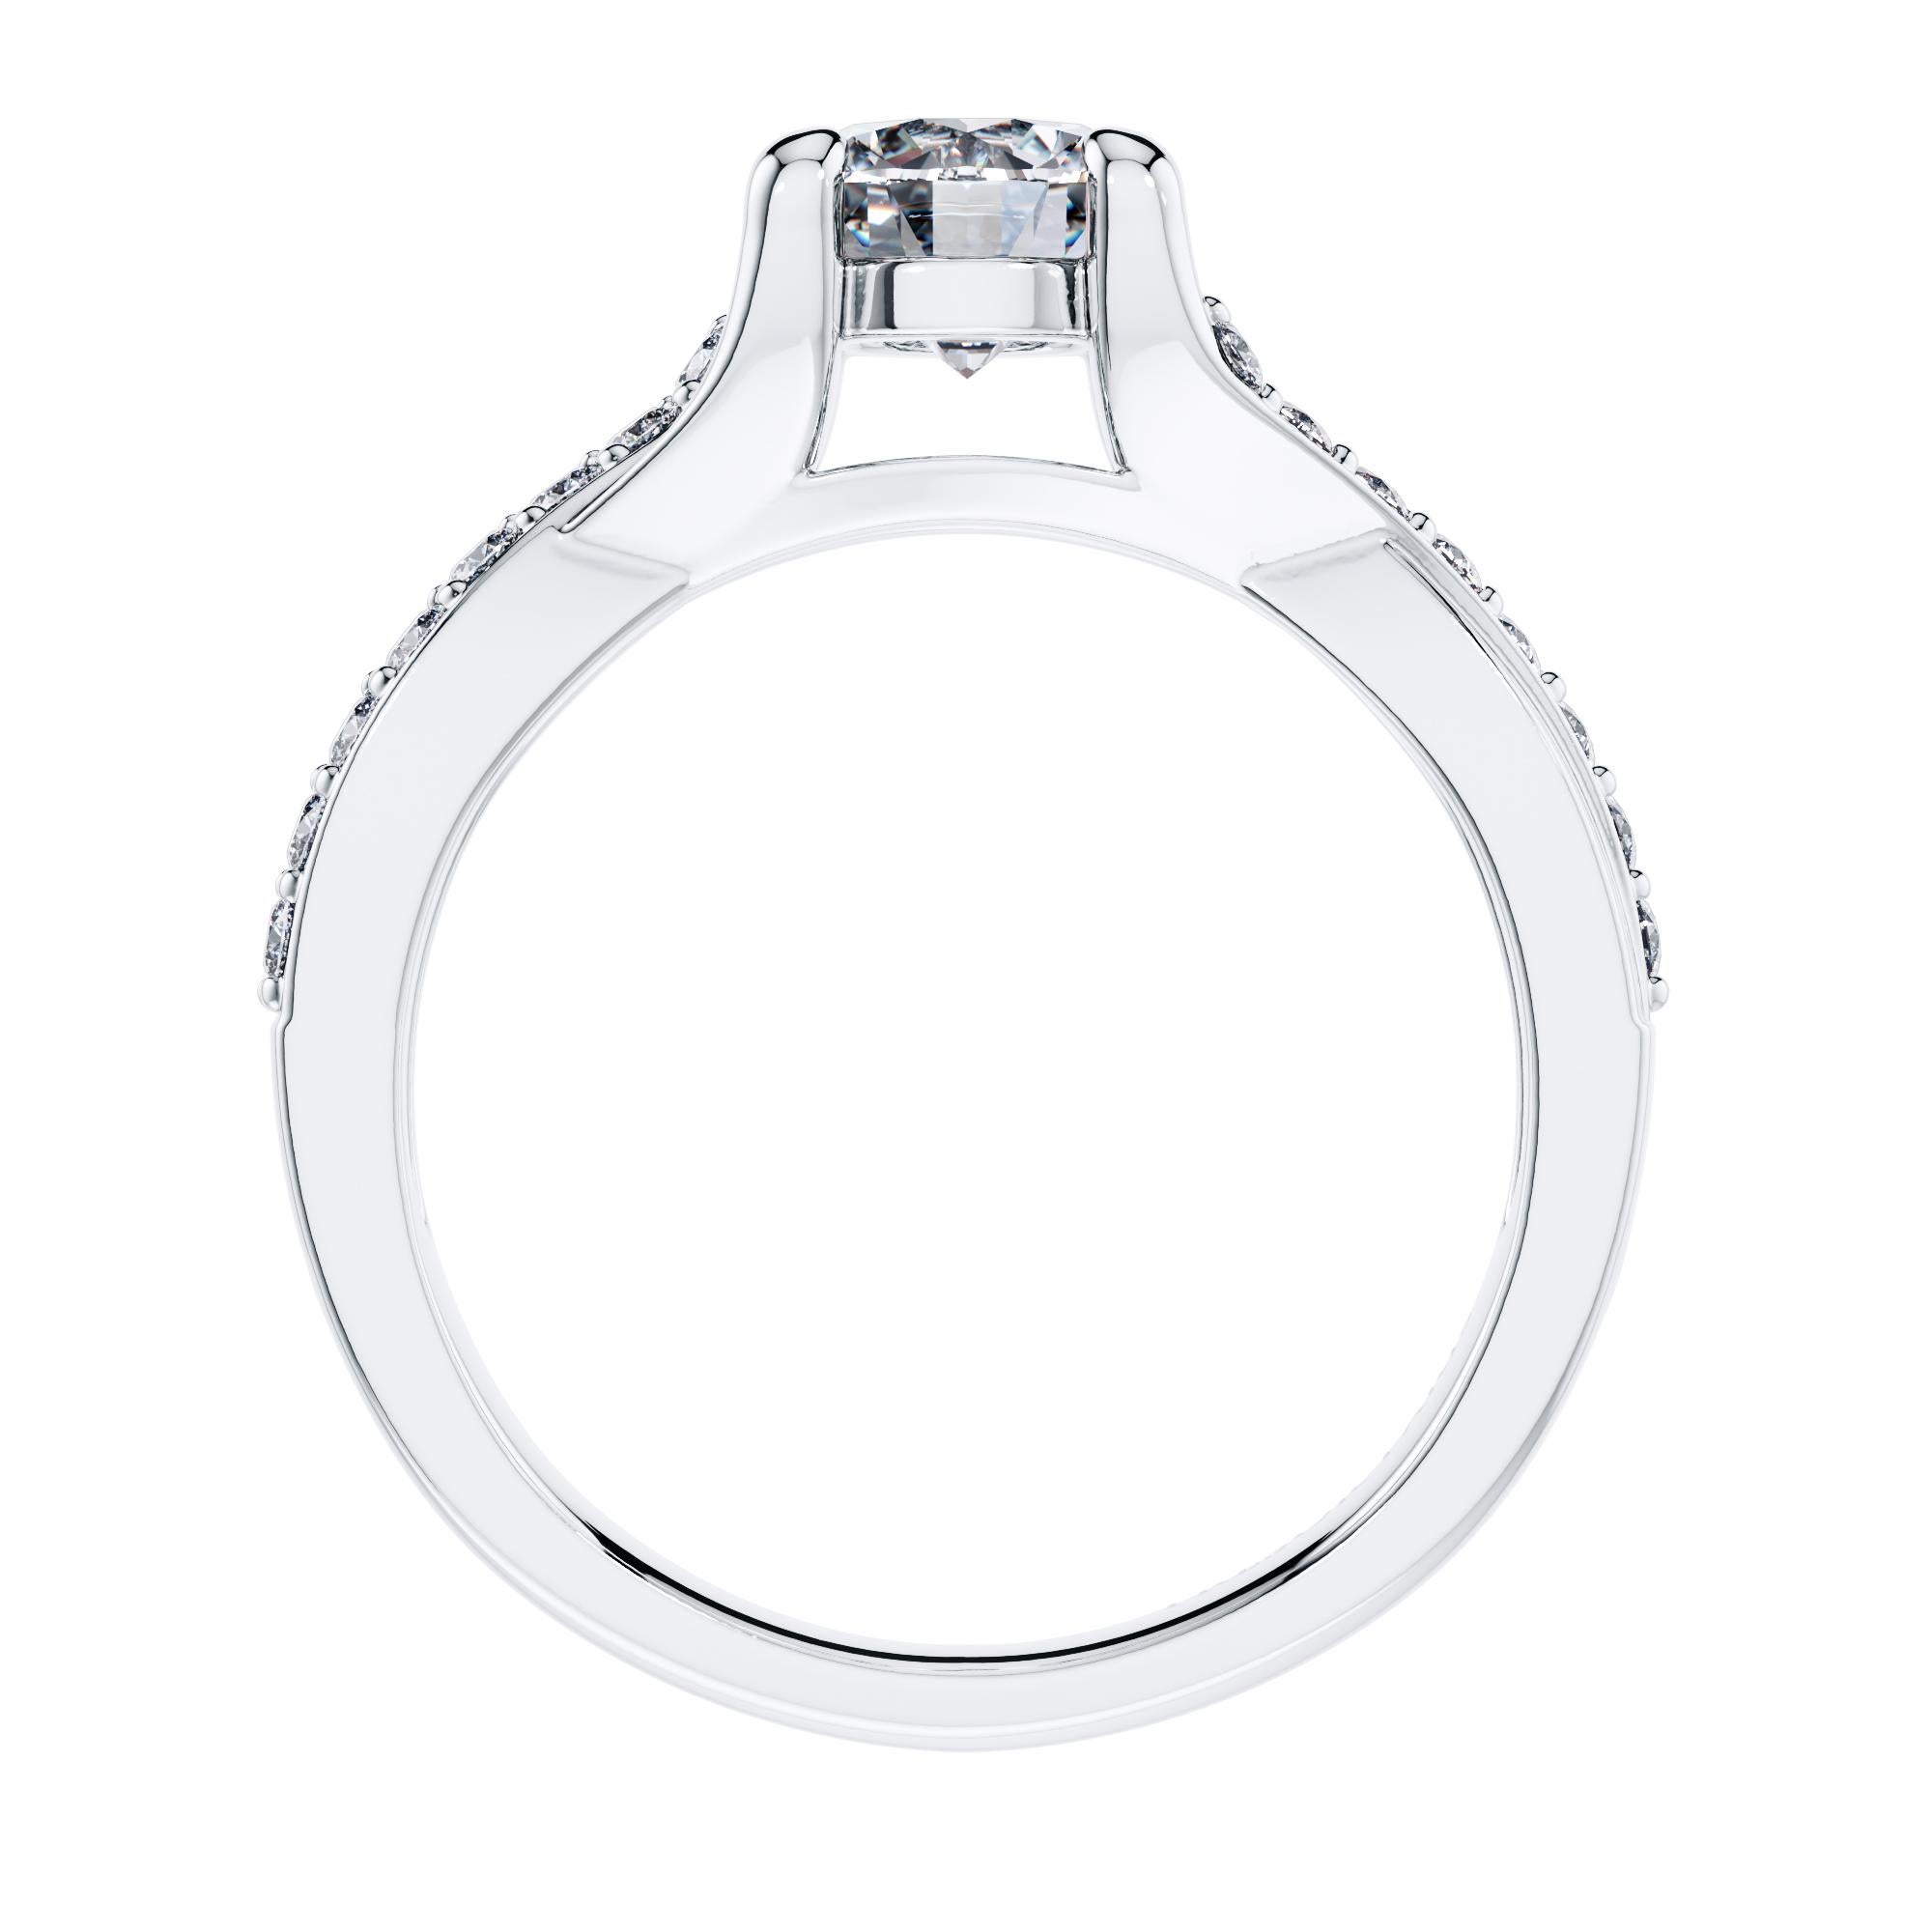 For a beautifully entwined journey together, this gleaming twisted vine modern classic engagement ring. Handmade in high grade Platinum 950 to British Standard, with a total of 0.82 Carat White Diamonds. Set in an open gallery 4 prong mount with a